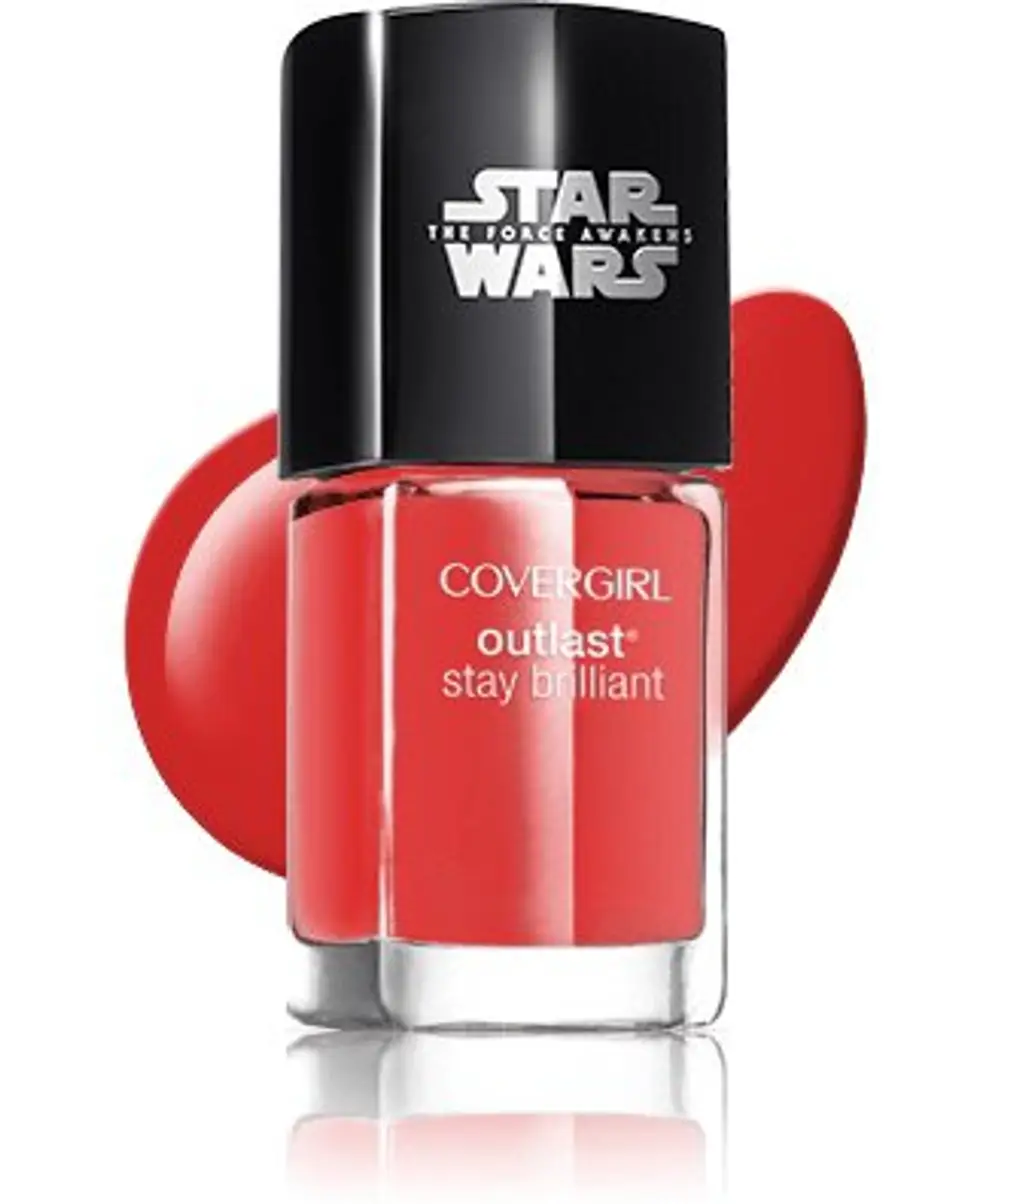 CoverGirl Star Wars Outlast Nail Polish in Fury